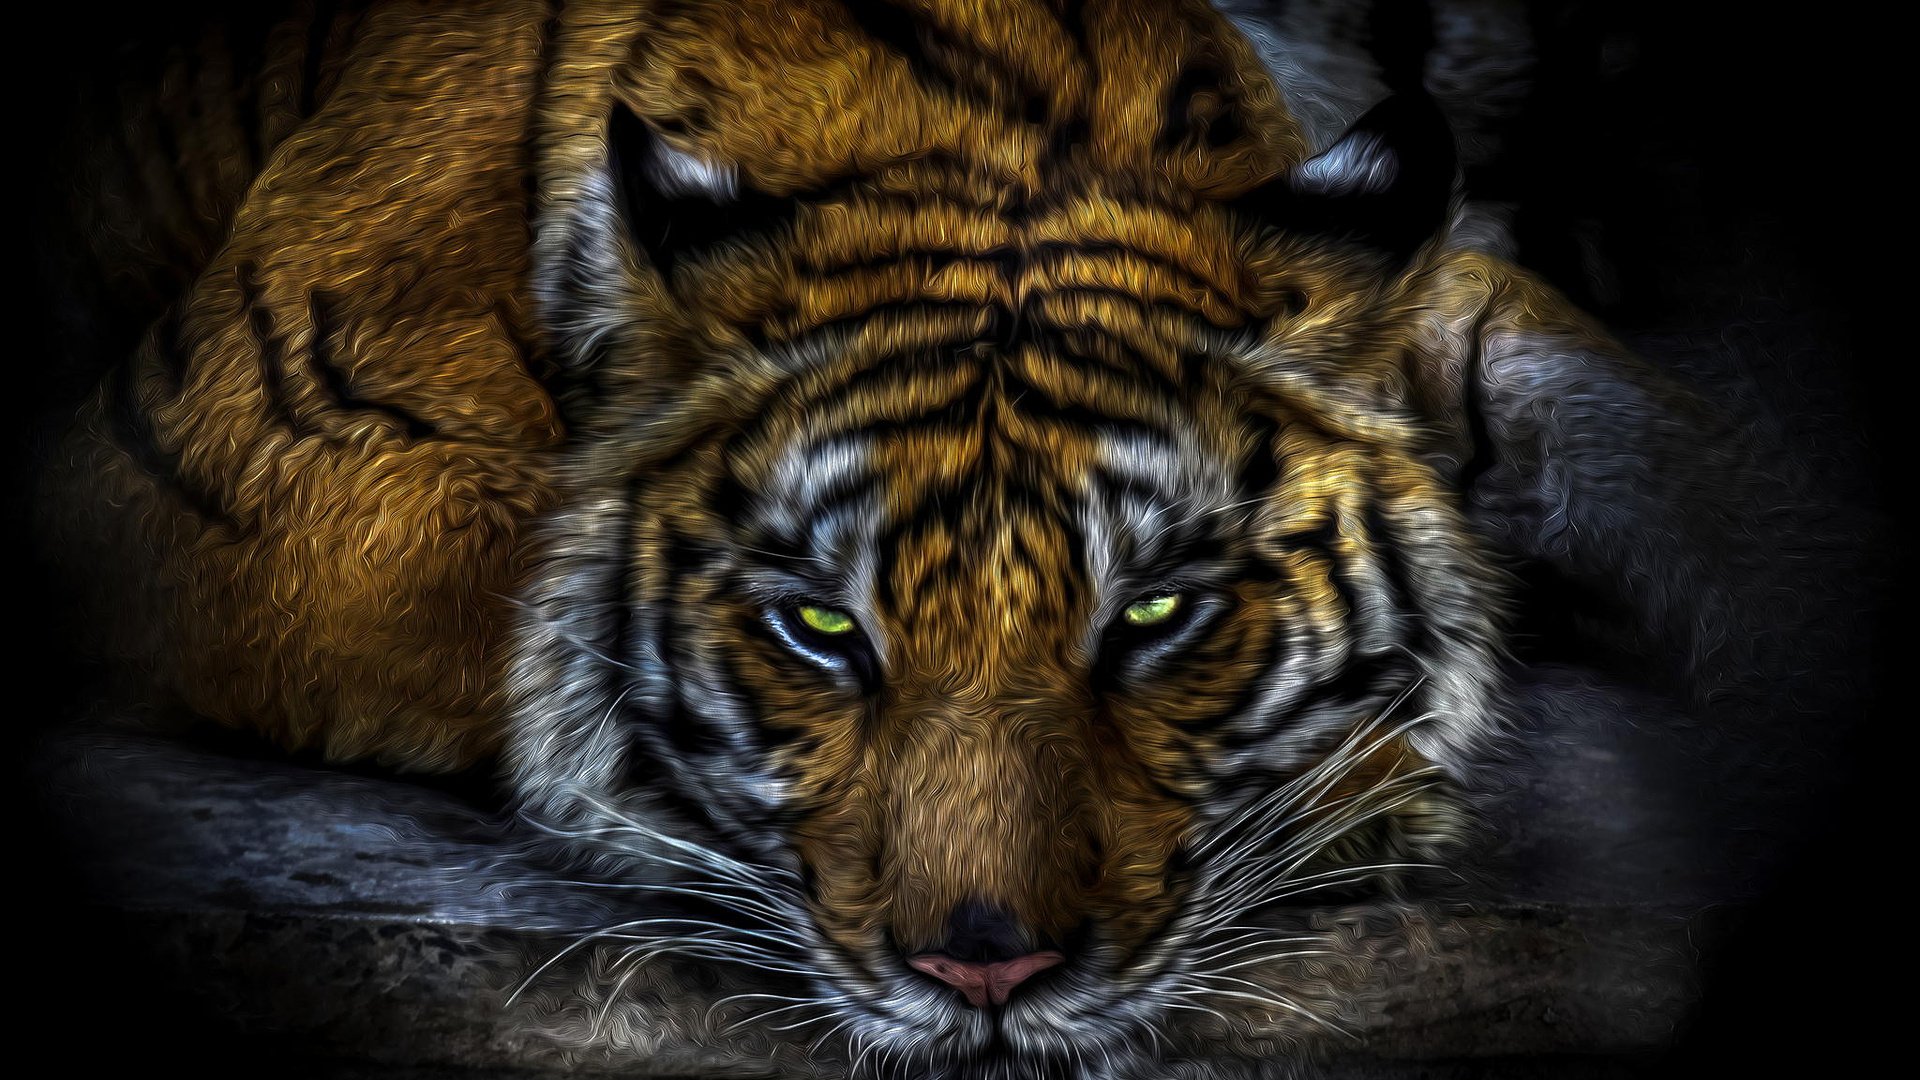 Tiger Full HD Wallpaper and Background Image | 1920x1080 | ID:594399